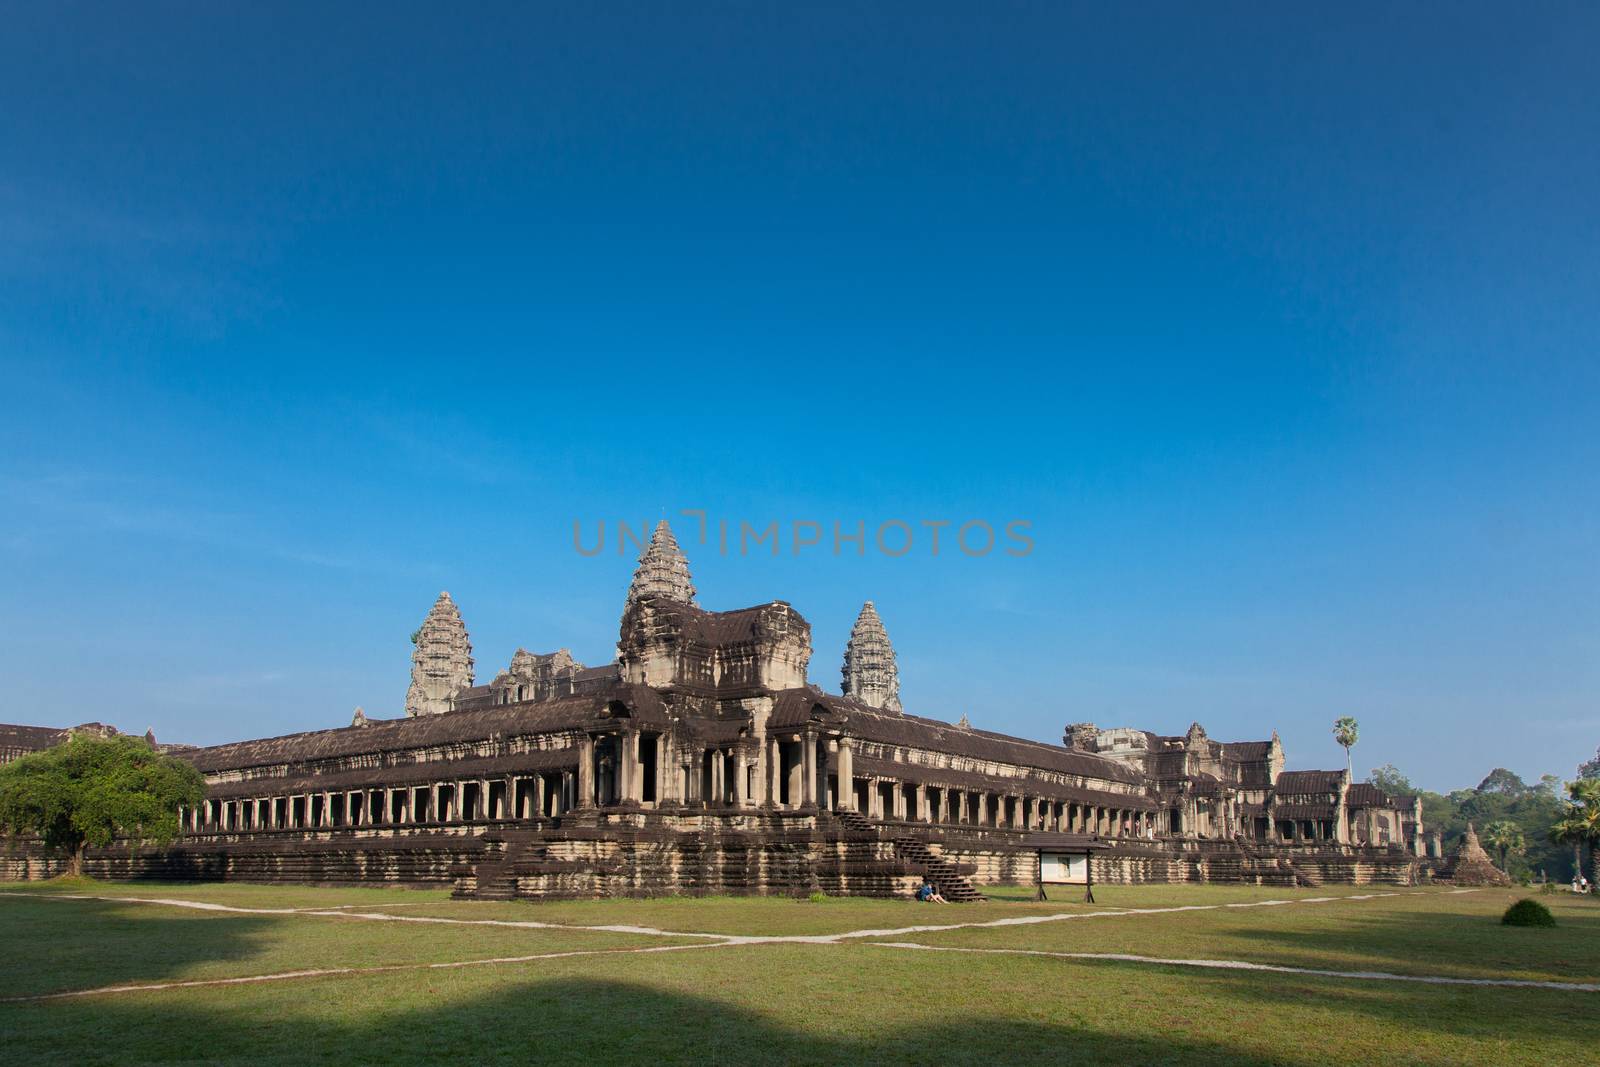 The temple complex of Angkor Watt, Cambodia wide angle image with deep blue sky by kgboxford